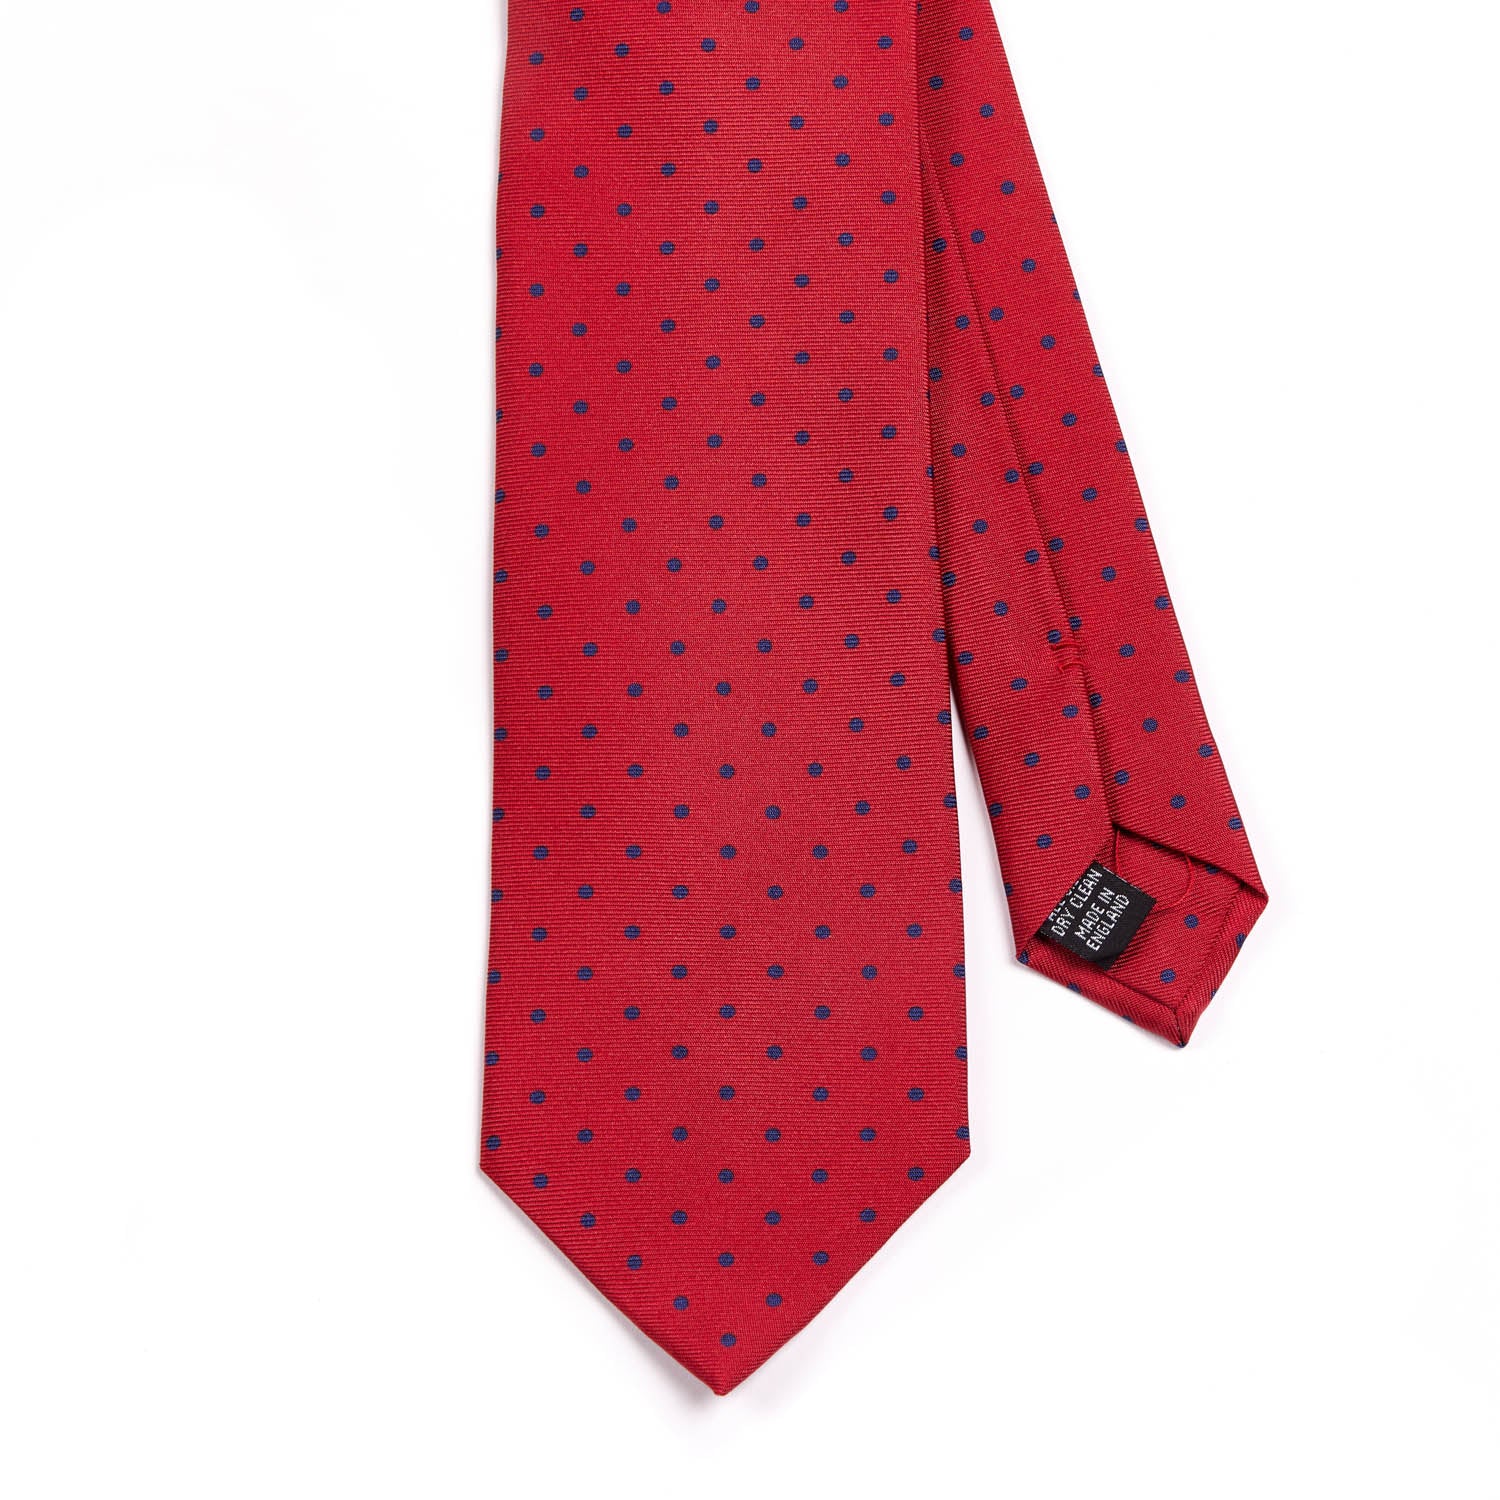 A Sovereign Grade Red London Dot Printed Silk Tie, 150cm on a white background of quality from KirbyAllison.com.